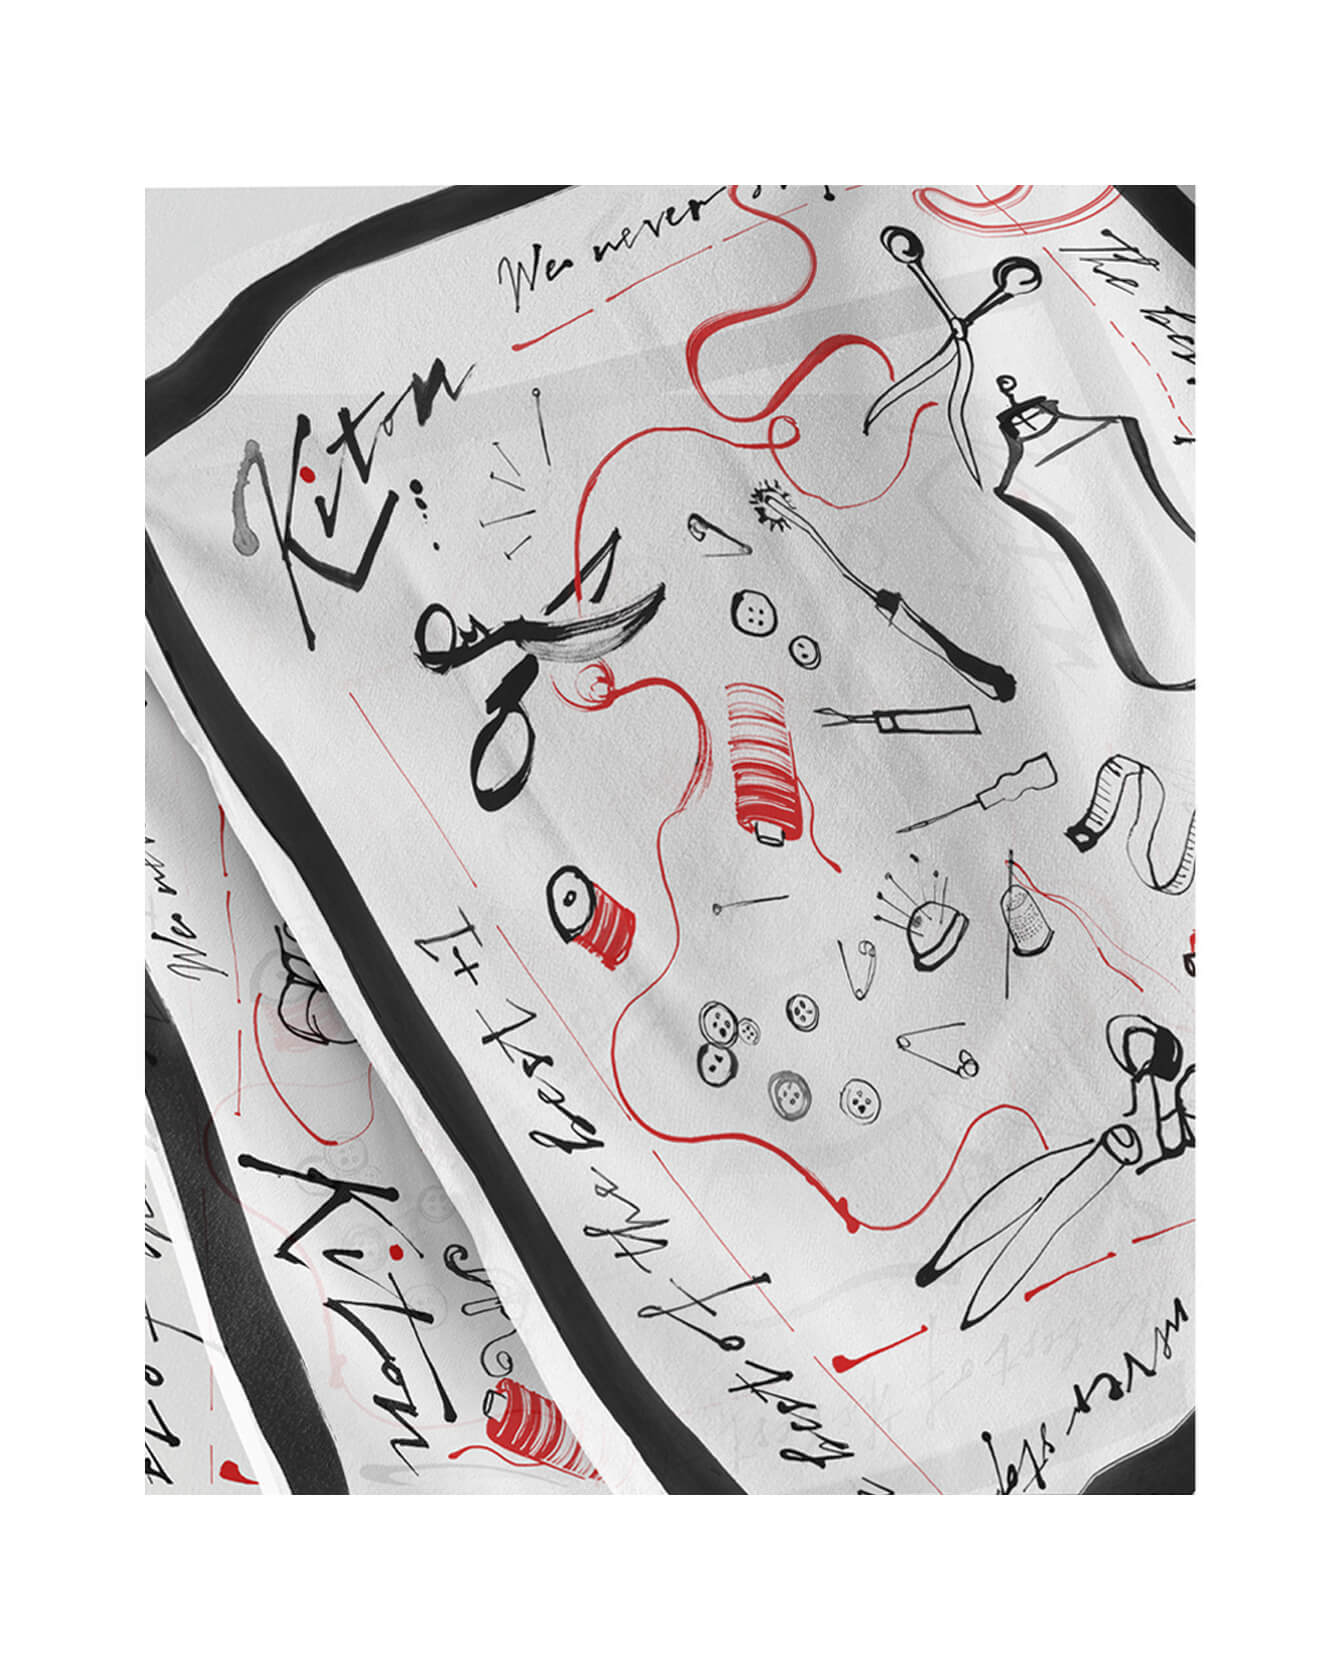 Hand painted illustrated objects - the tailors tools. Scissors, needles, thread, fashion mannequin, All brush stroke, hand painted ink style illustration and hand drawn lettering - for Naples fashion house Kiton. In a limited colour palette of black, white and red.